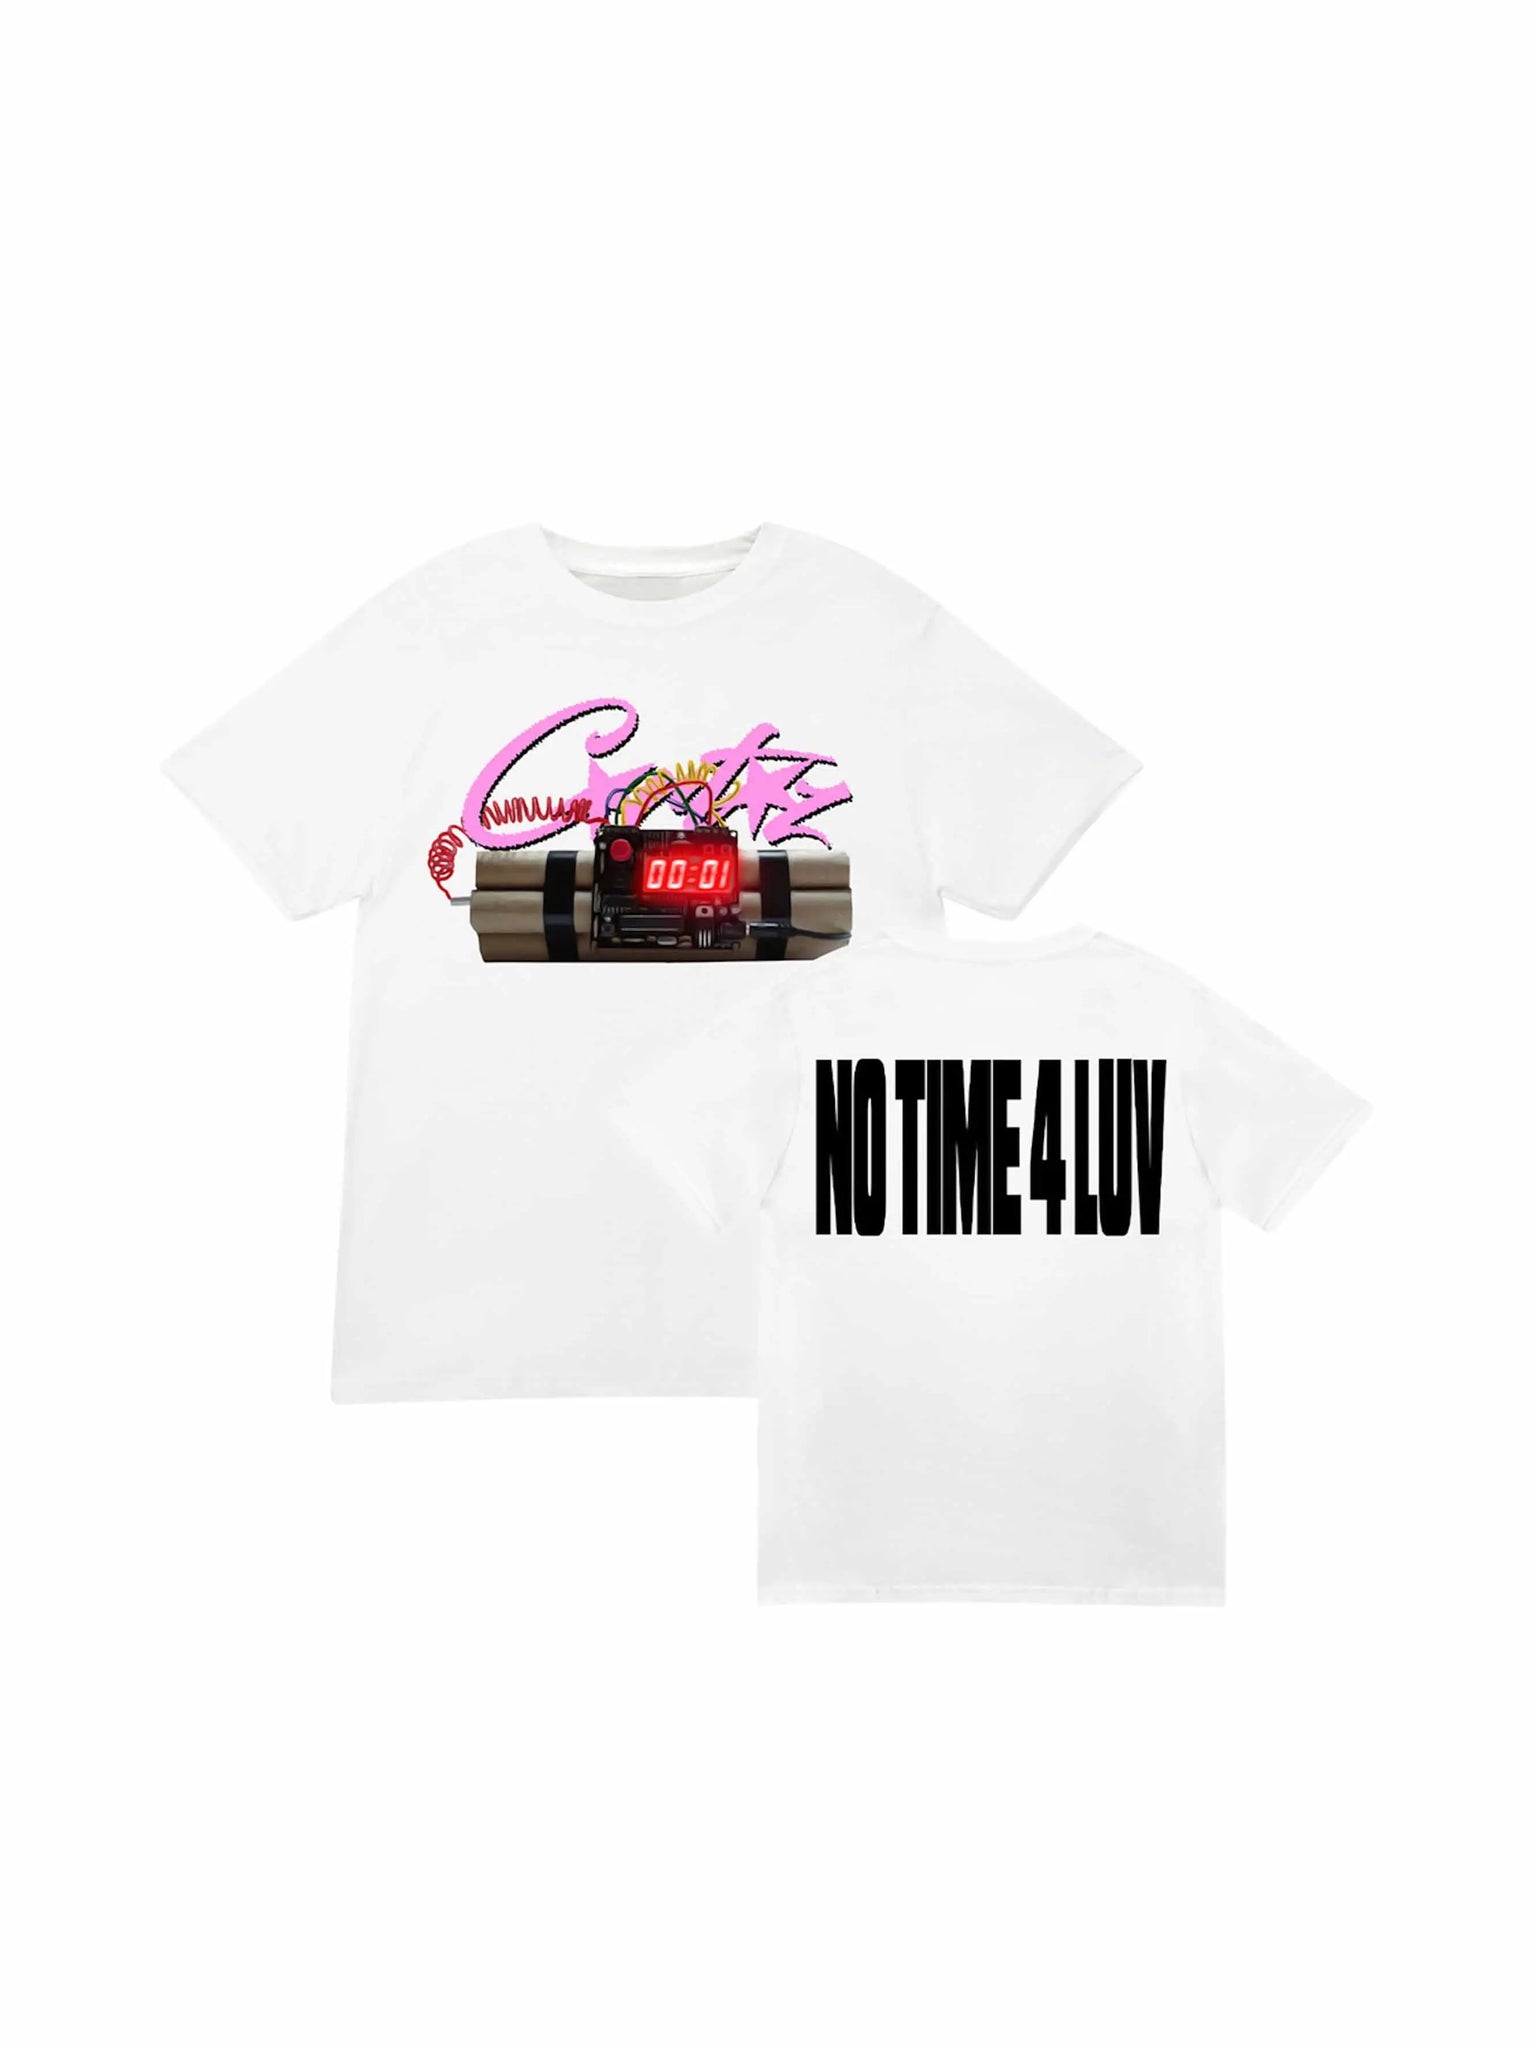 Corteiz No Time 4 Luv Tee White in Auckland, New Zealand - Shop name